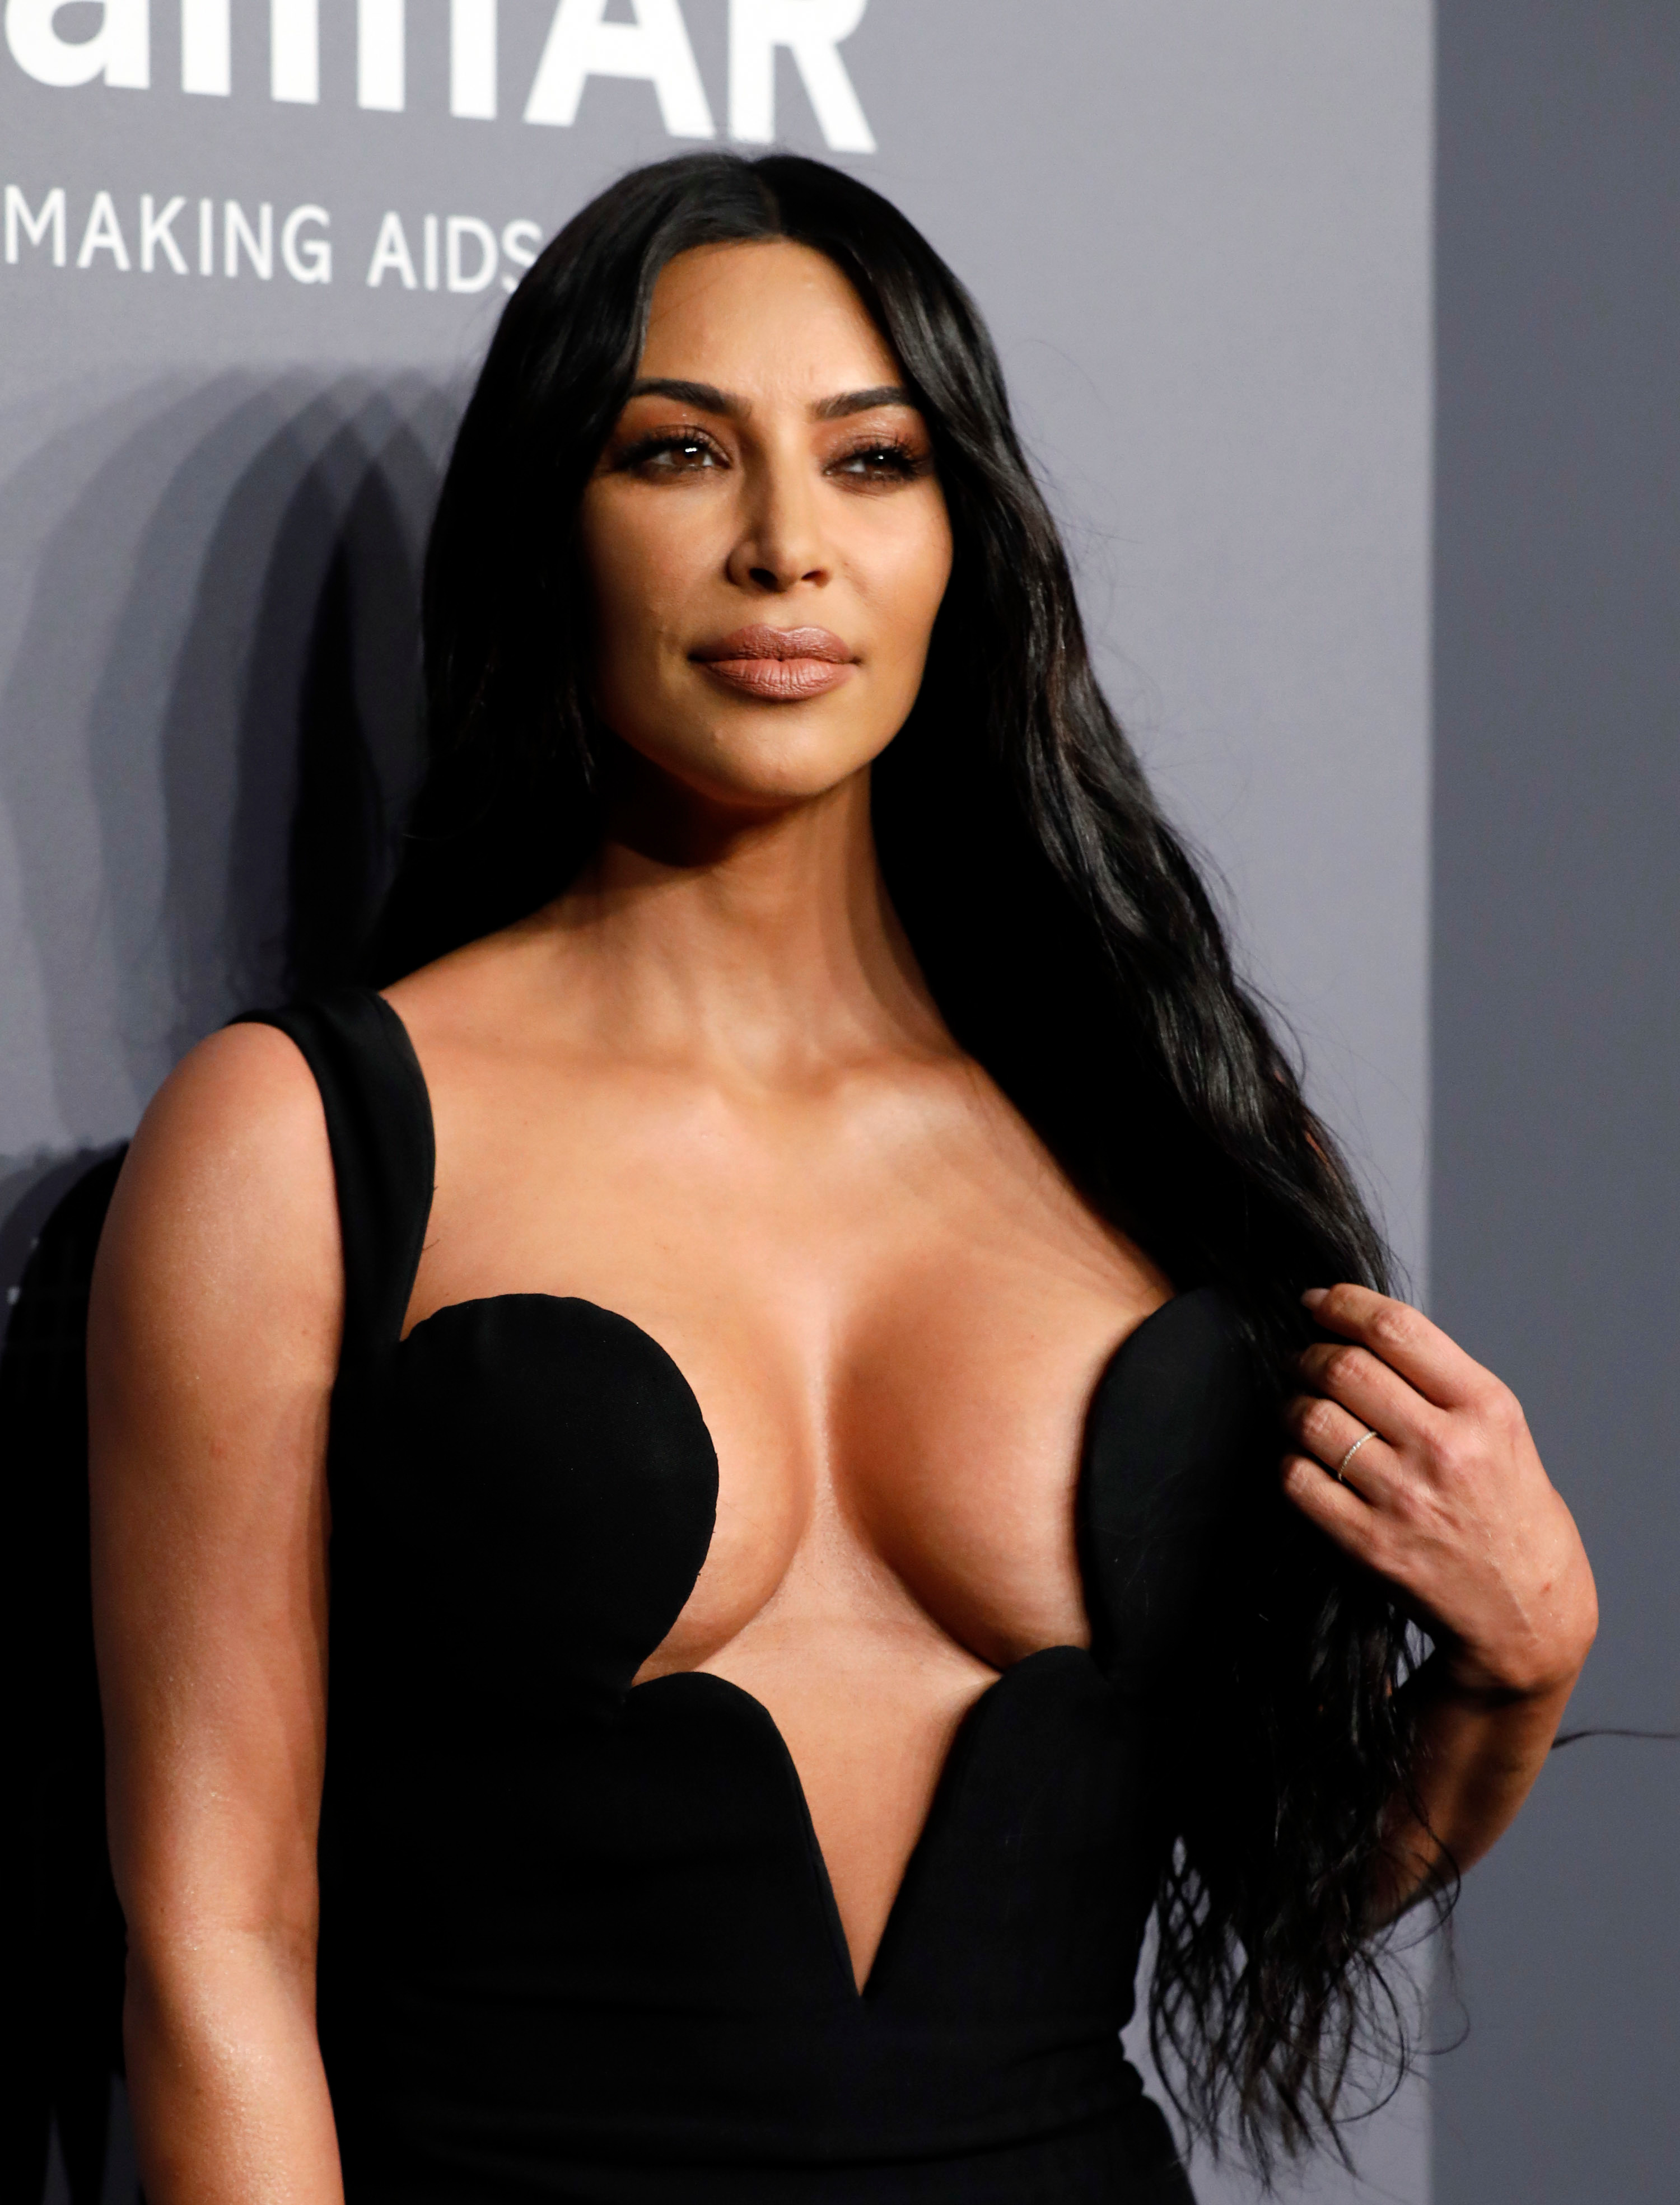 Kim Kardashian Before And After: Plastic Surgery Timeline